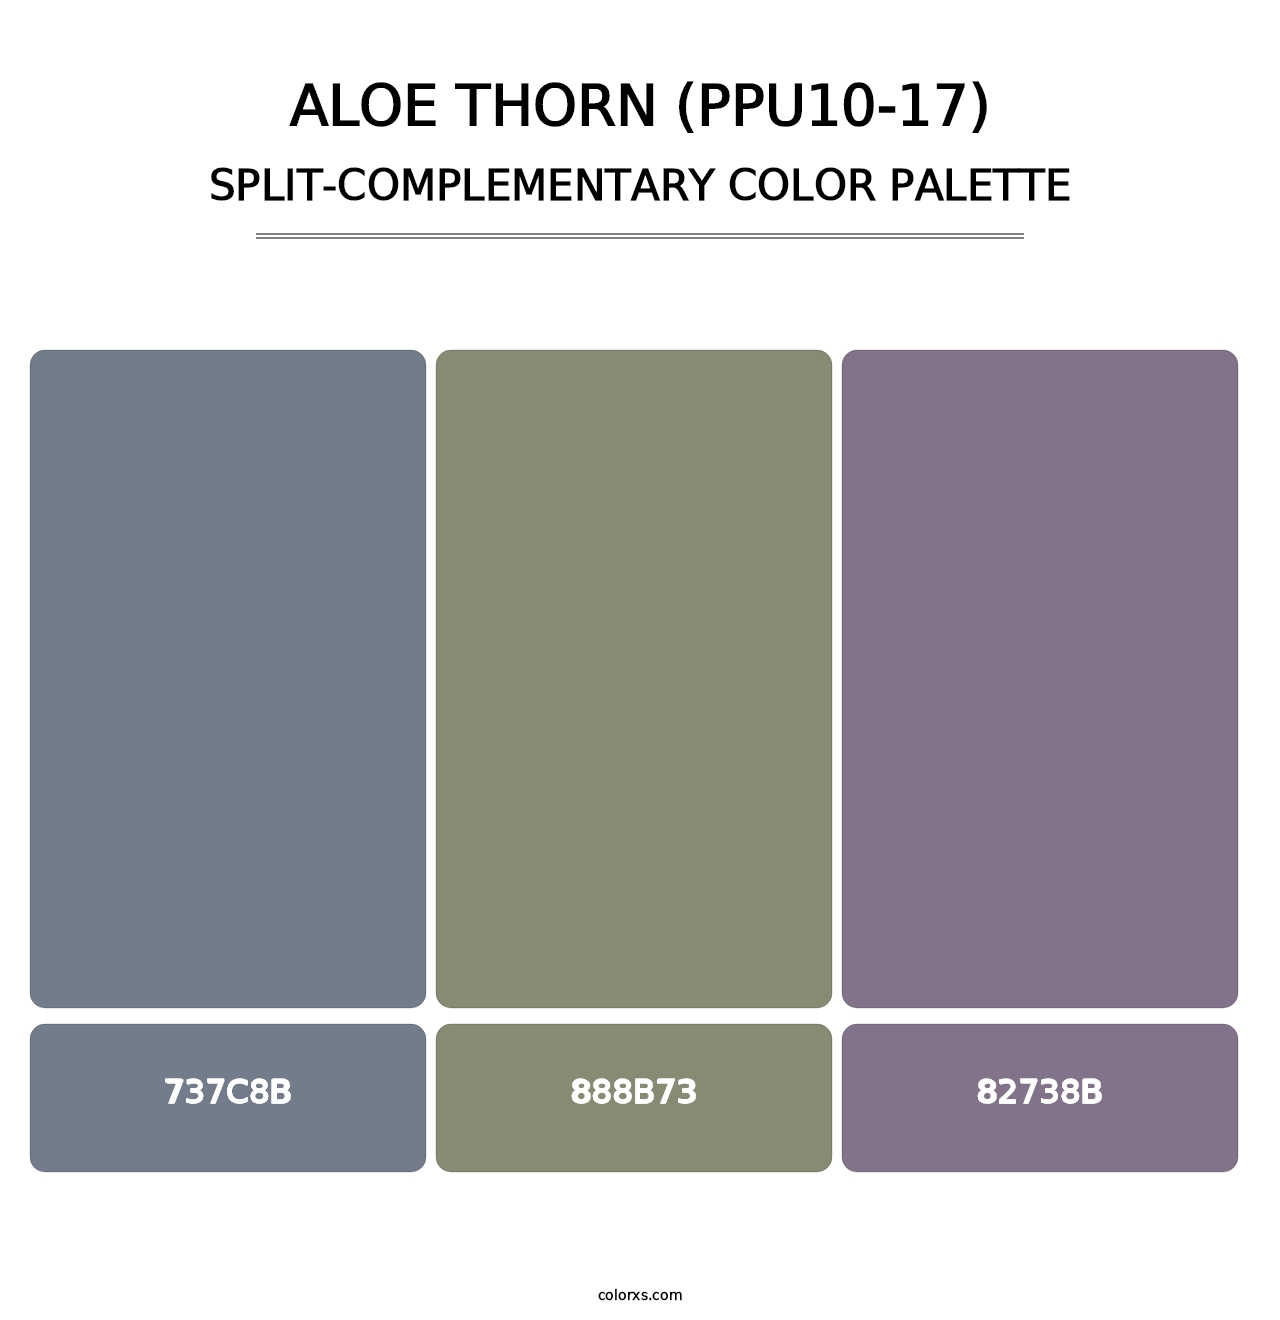 Aloe Thorn (PPU10-17) - Split-Complementary Color Palette